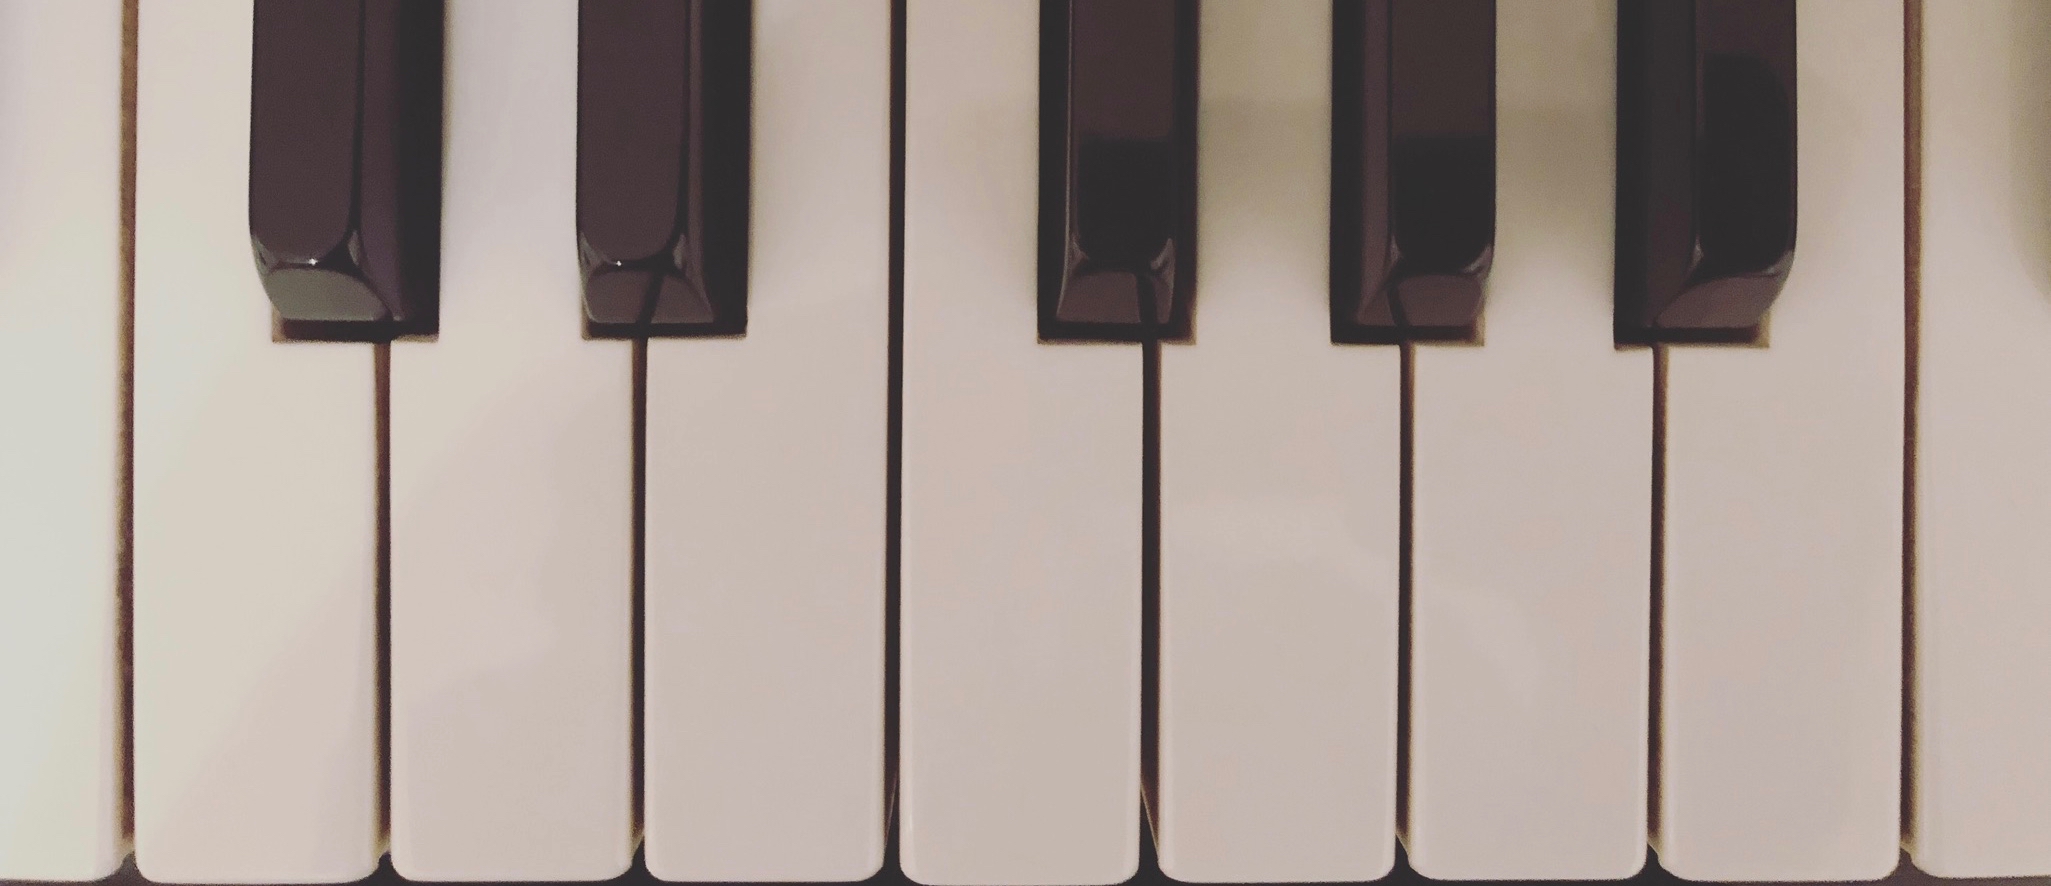 Piano Keys for the worship leader musician